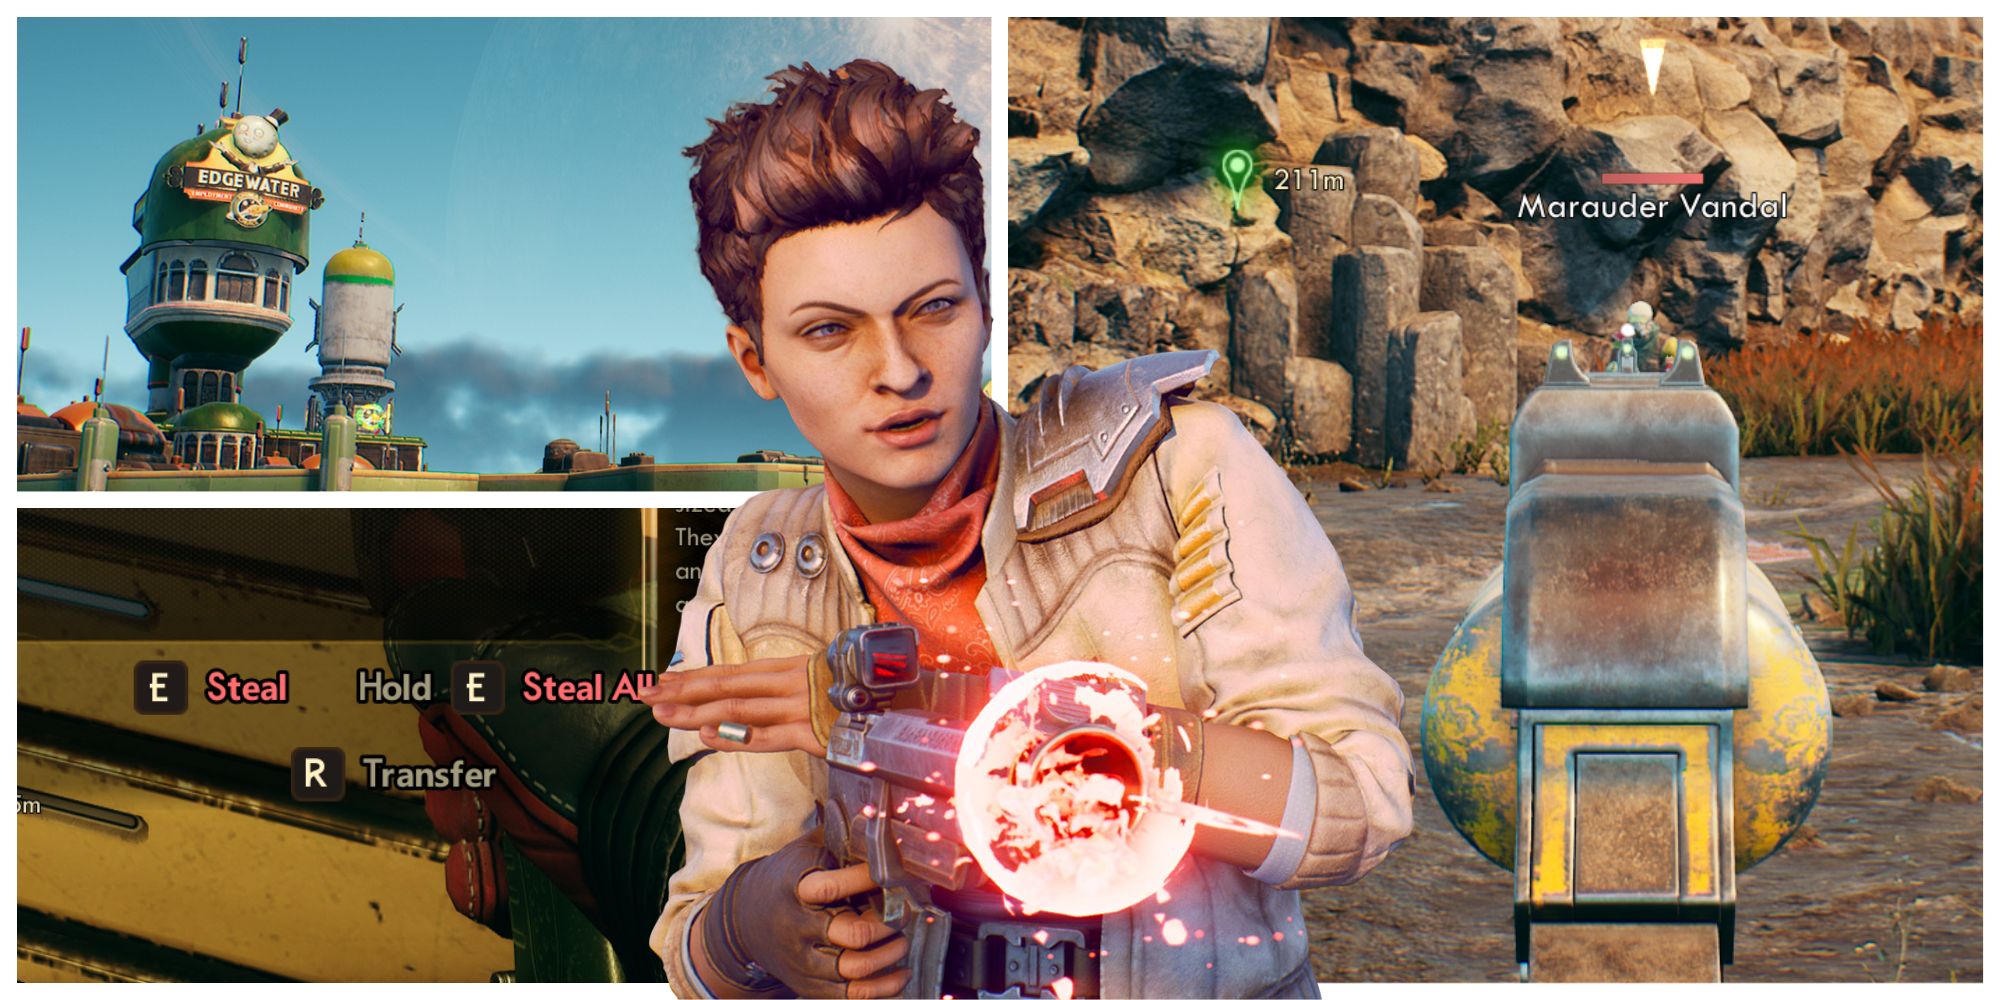 The Outer Worlds - Exclusive Edgewater Gameplay